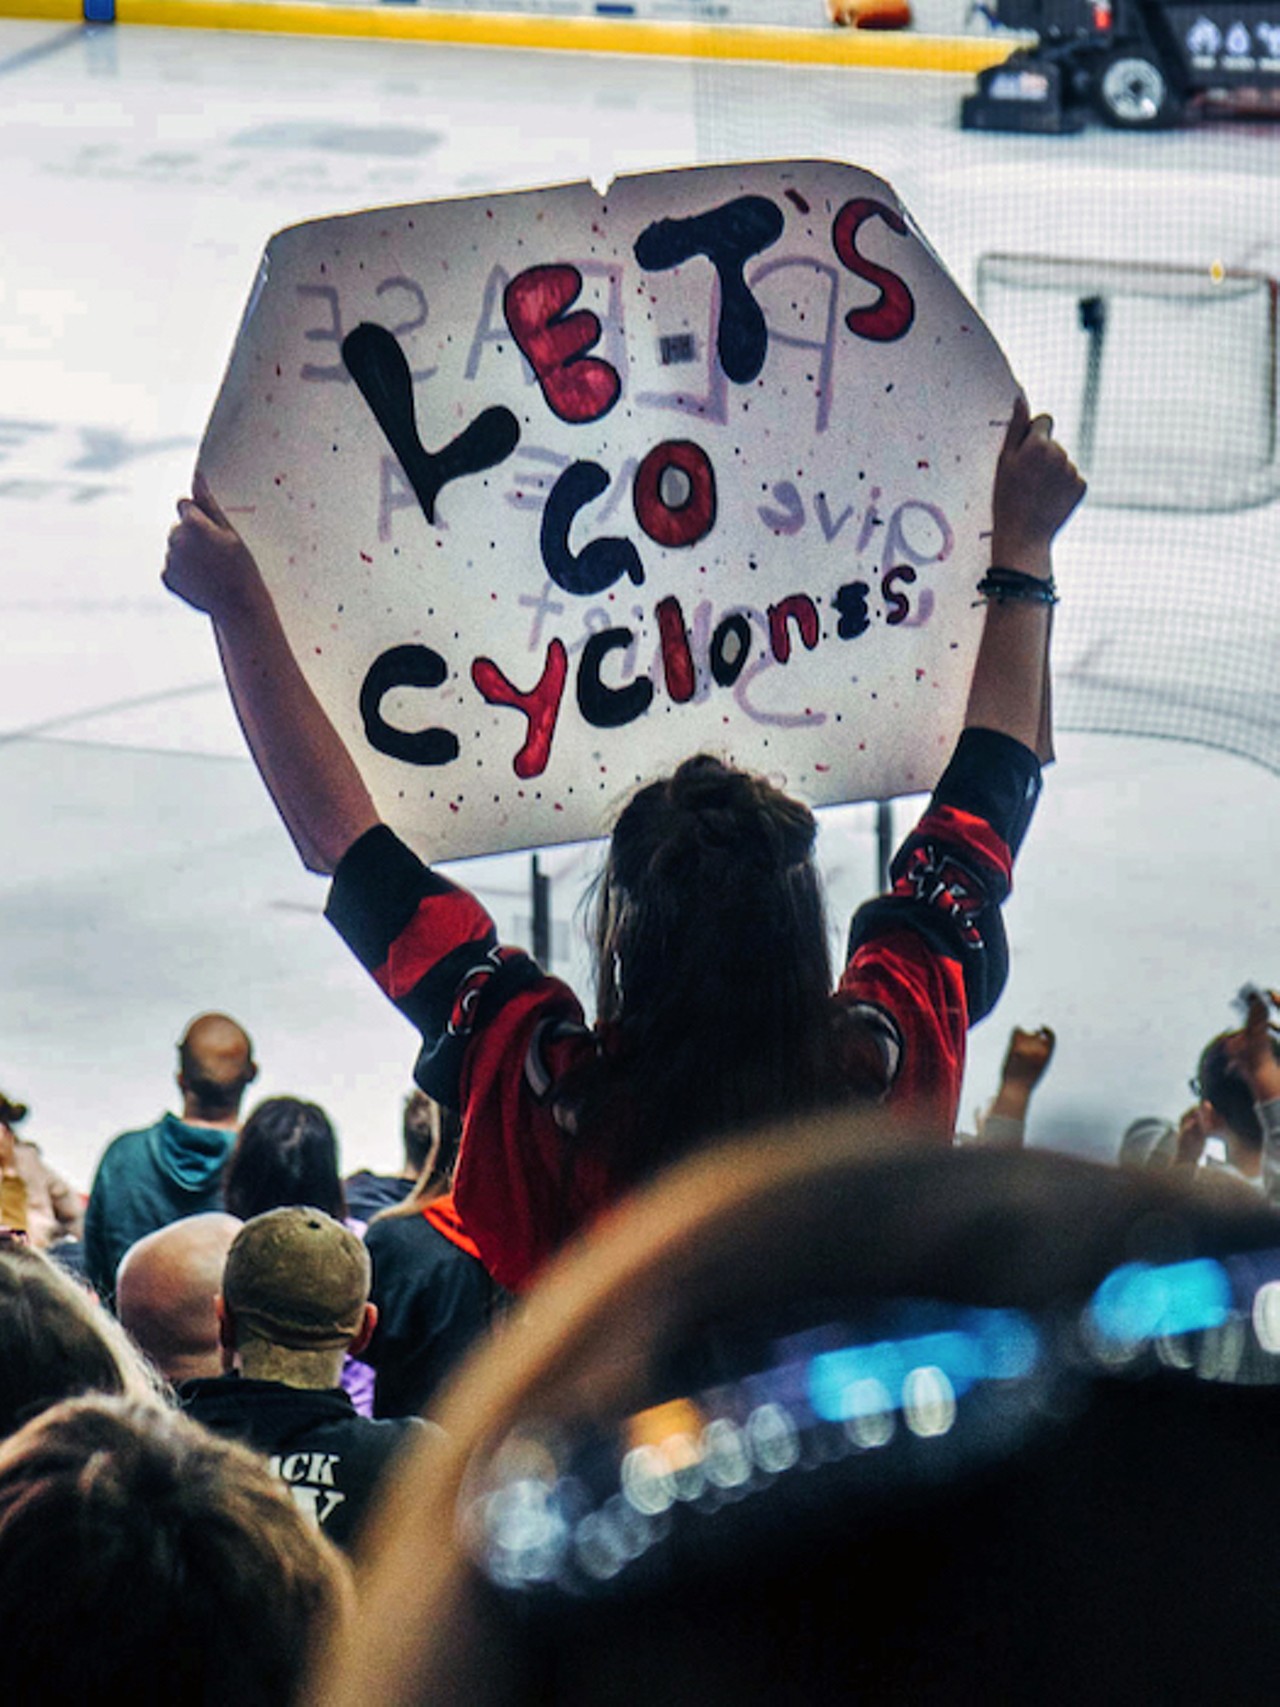 Cincinnati Cyclones v Wings | Fan Appreciation
When: April 5 at 7:30 p.m.
Where: Heritage Bank Center, Downtown
What: It's fan appreciation night, meaning that fans can enjoy $2 hotdogs, $2 soda and $2 beer.
Who: Cincinnati Cyclones
Why: The season is drawing to an end soon, so get to a game before the ice melts.